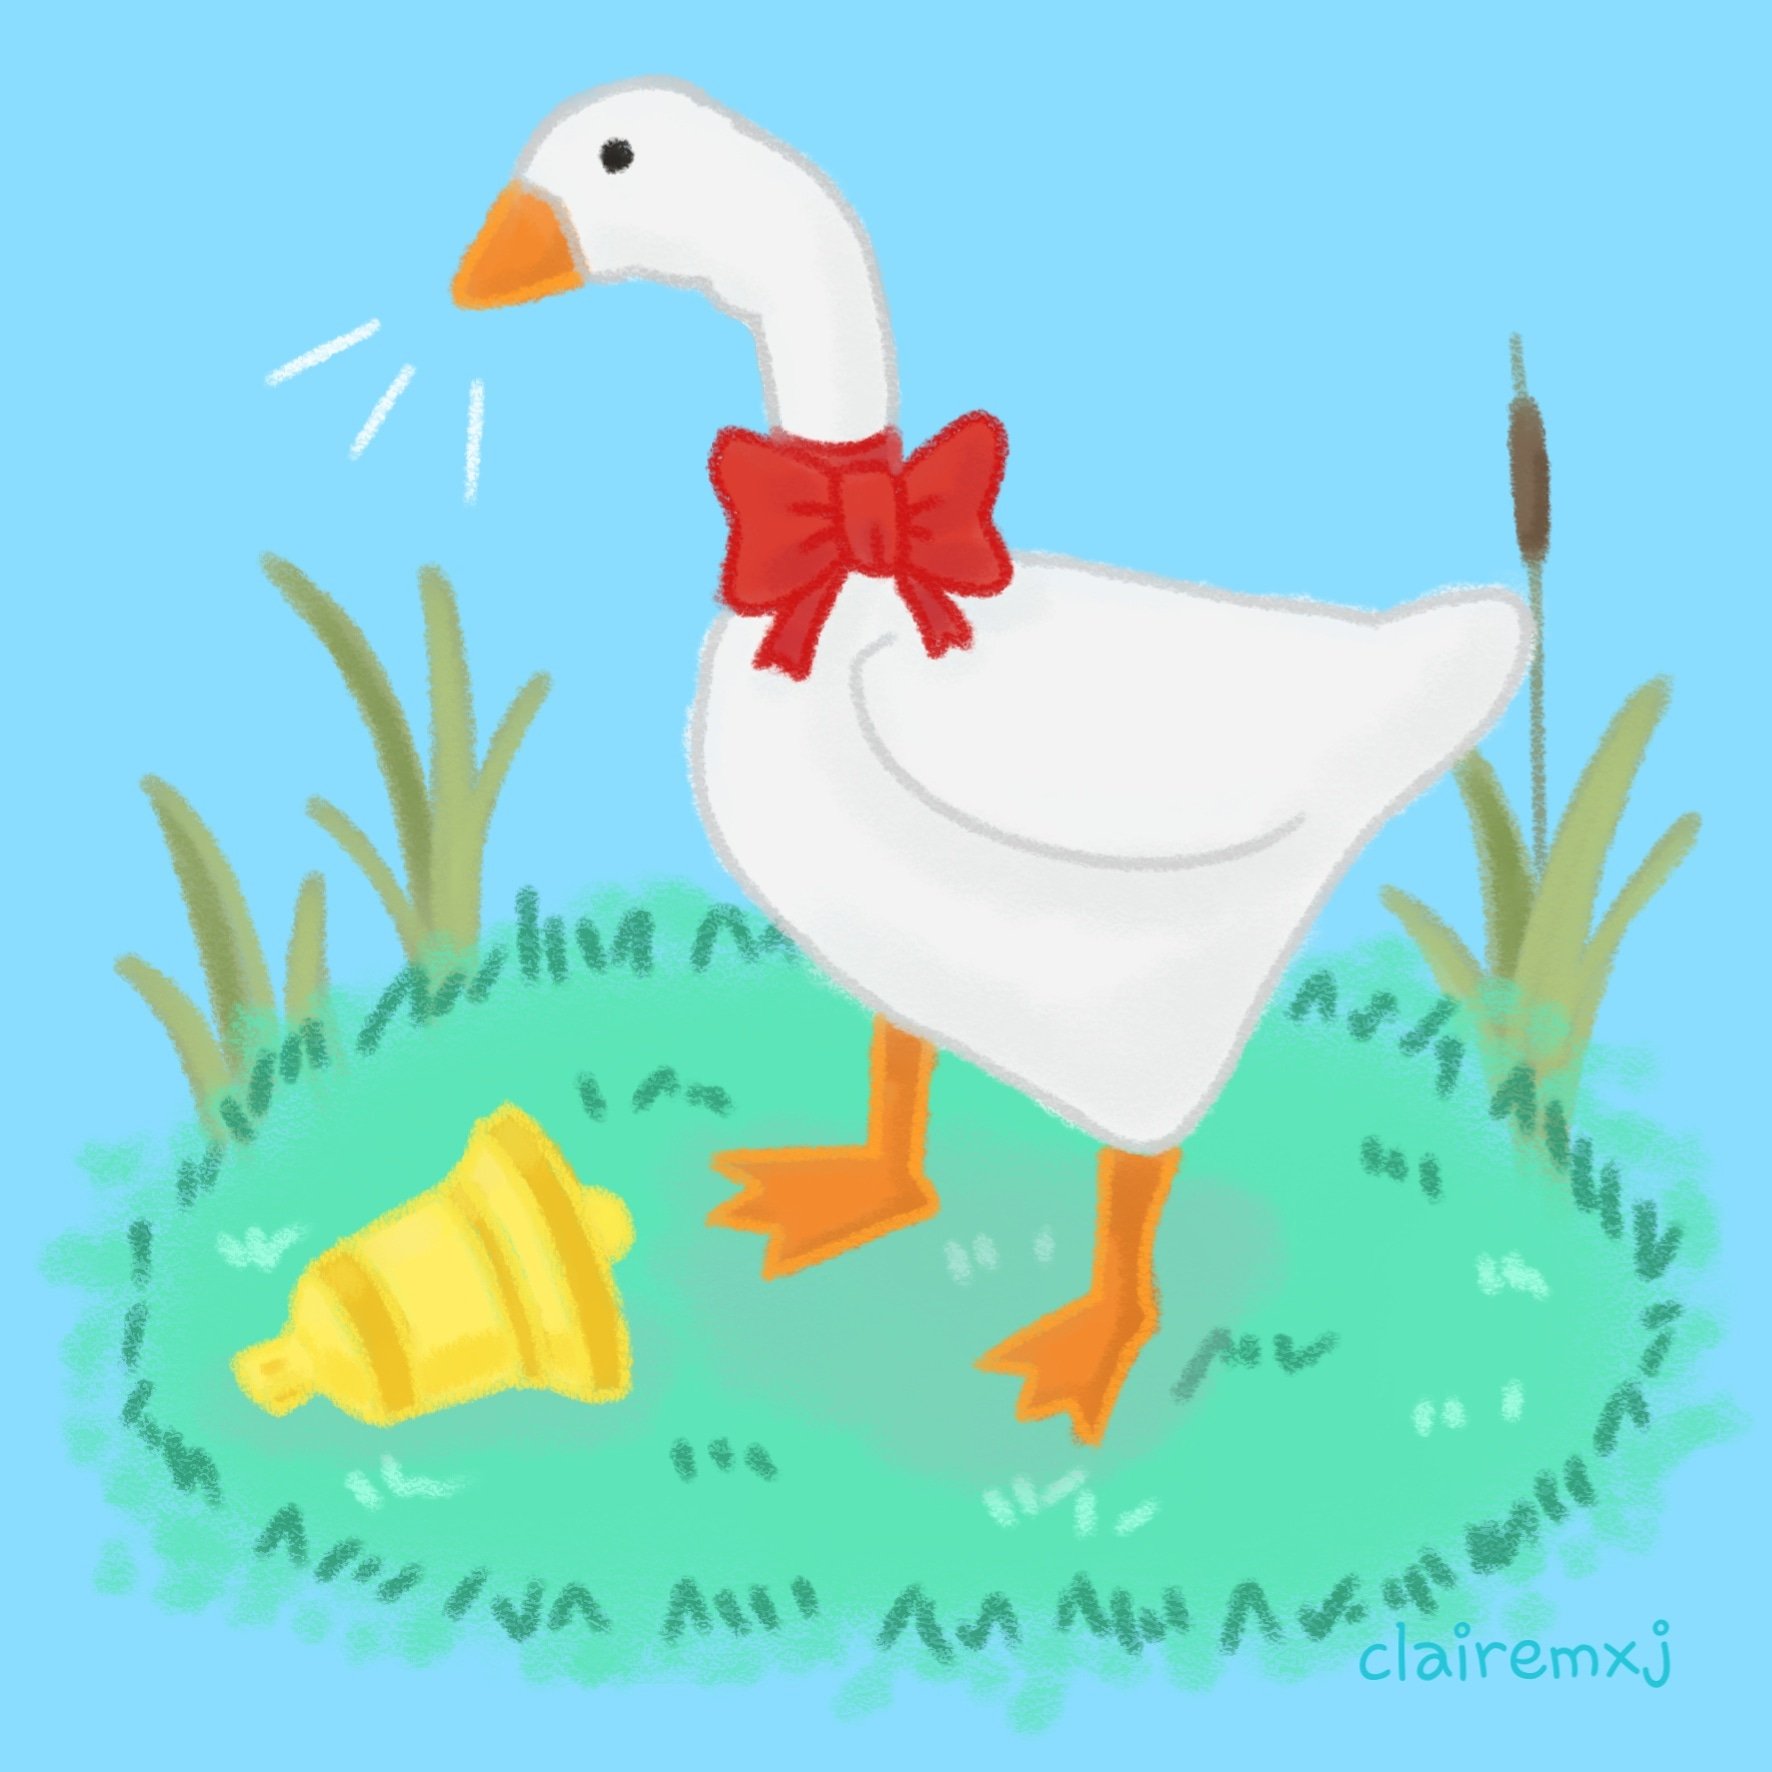 Clairemxj Commission Open Honk Honk Stressed Out In Life Need Something To Calm You Down Play This Game And Be An Annoying Goose Who Steals Everyone S Stuffs Goose